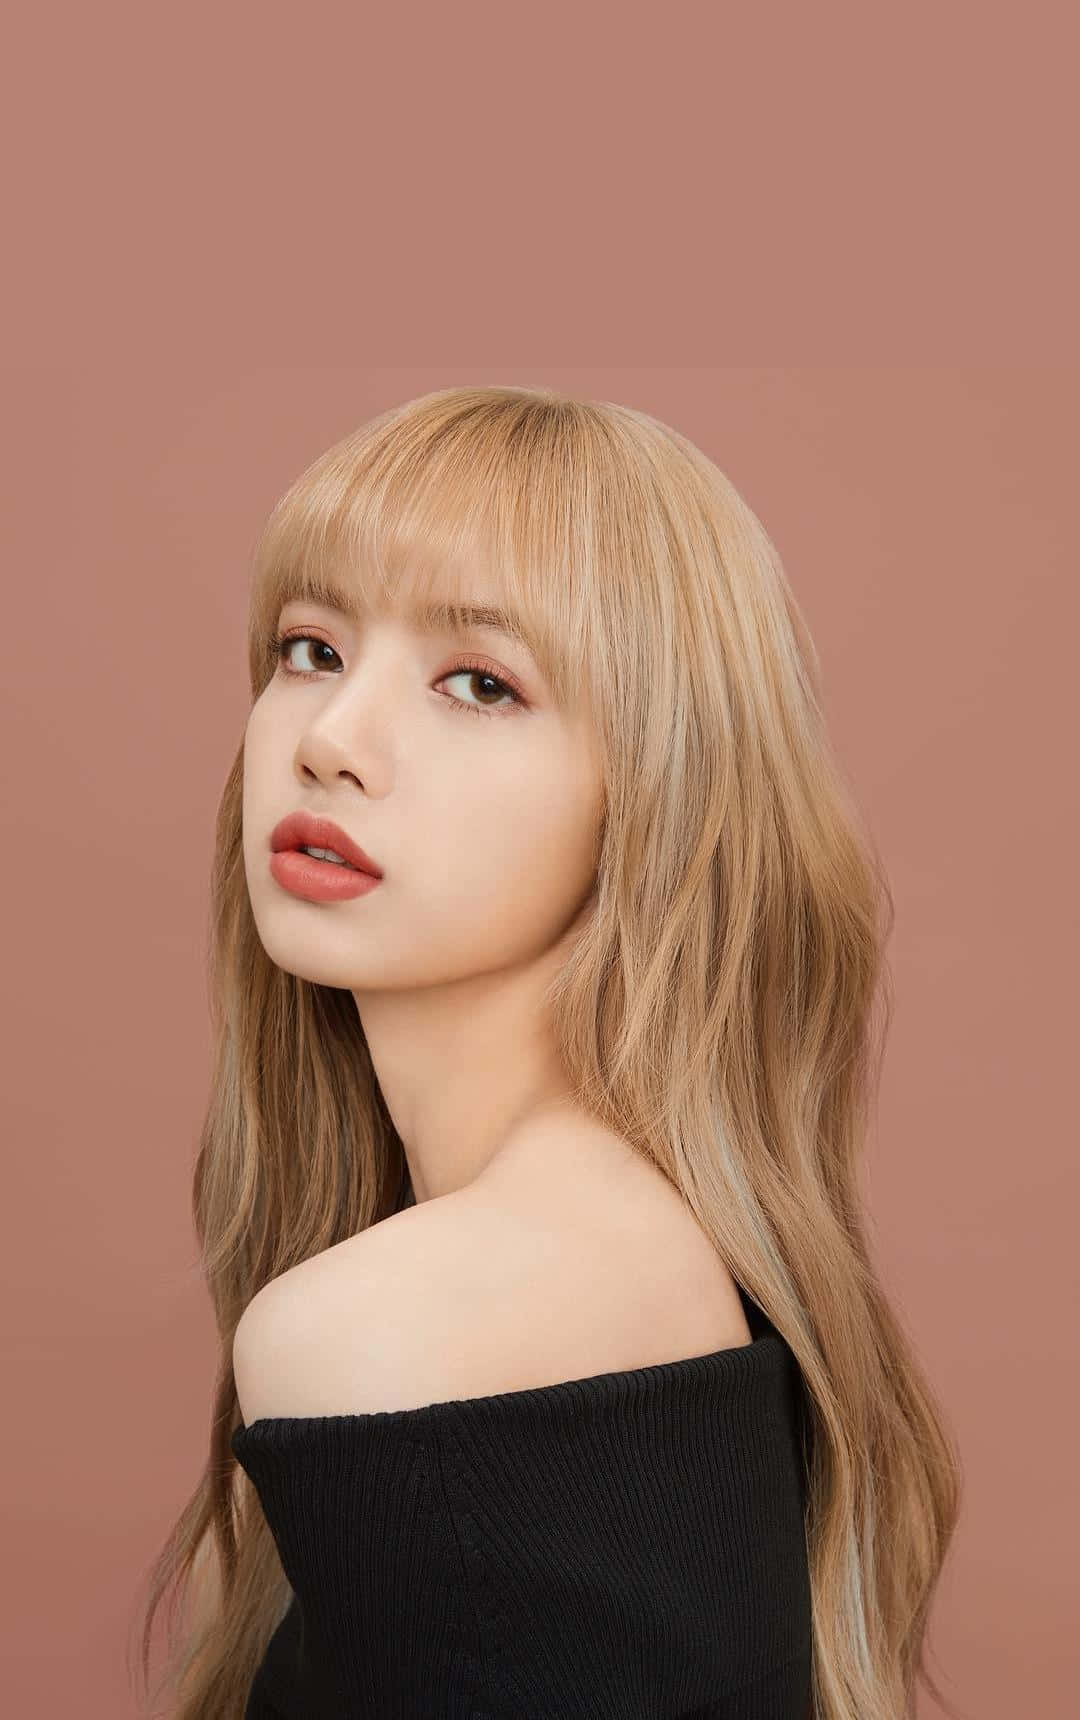 Lalisa is ready to rise to the top